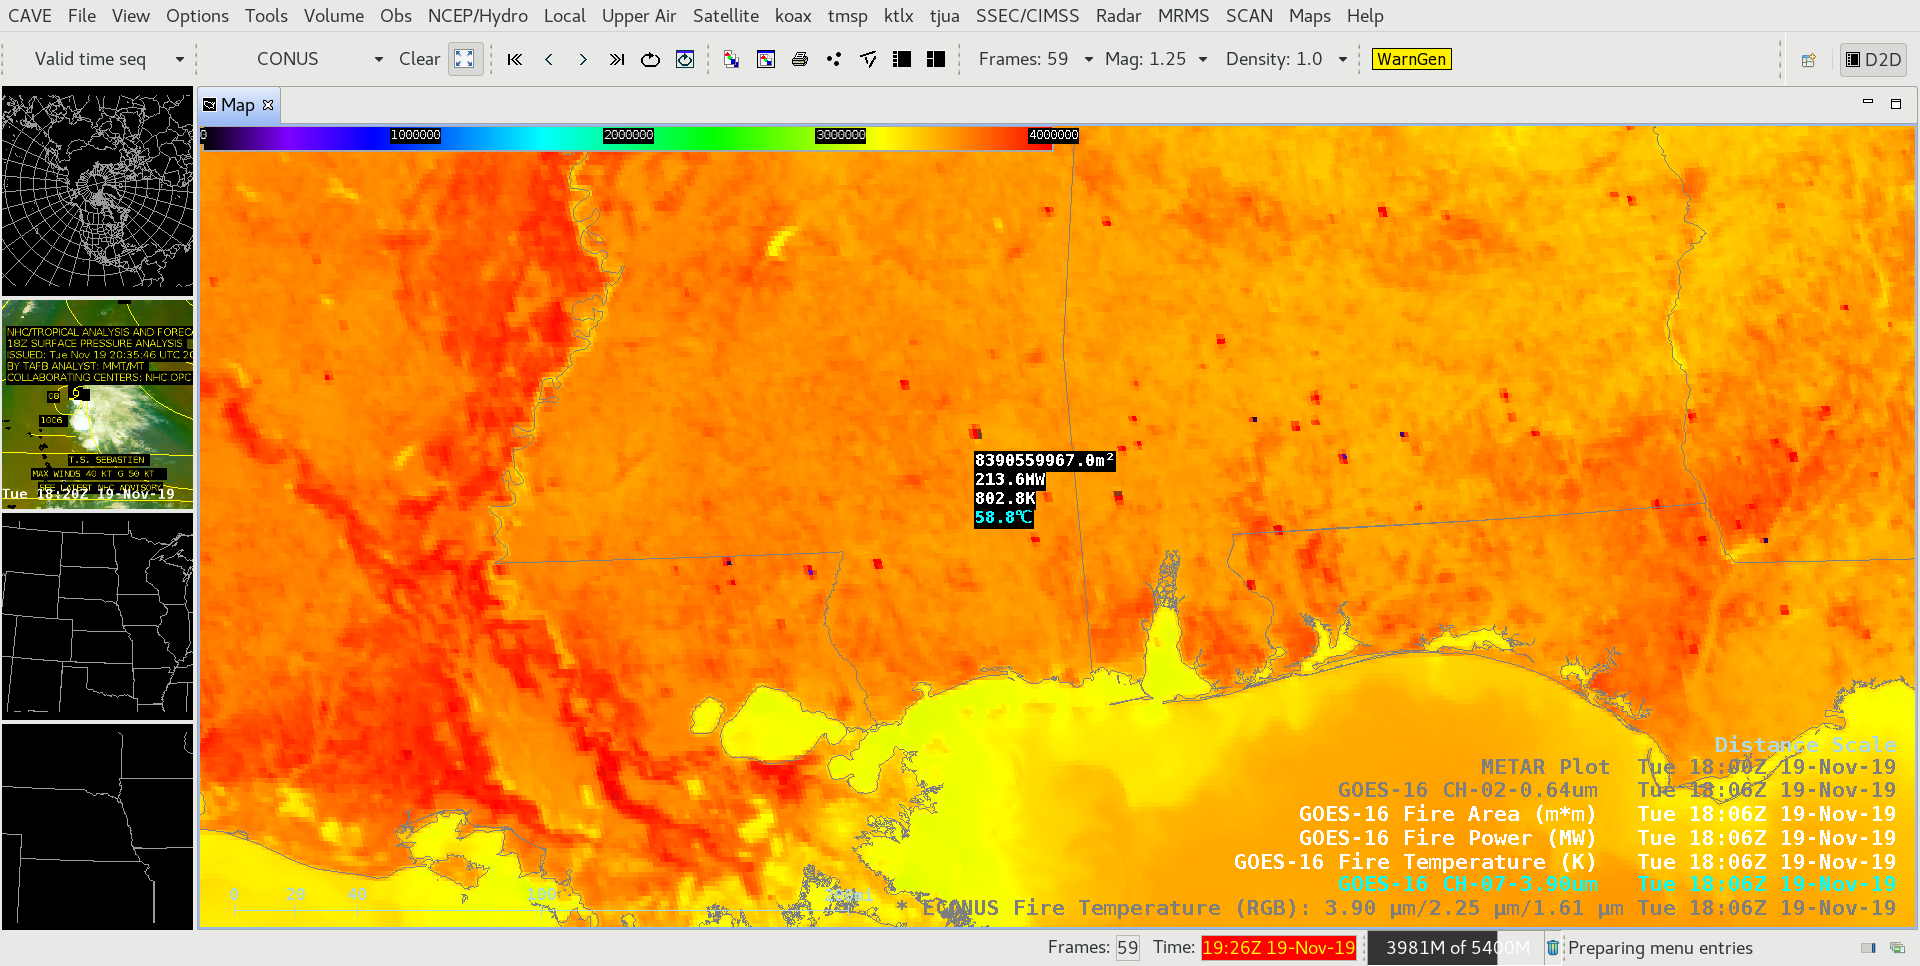 GOES-16 Shortwave Infrared (3.9 µm), Fire Temperature, Fire Power and Fire Area values at 1806 UTC [click to enlarge]